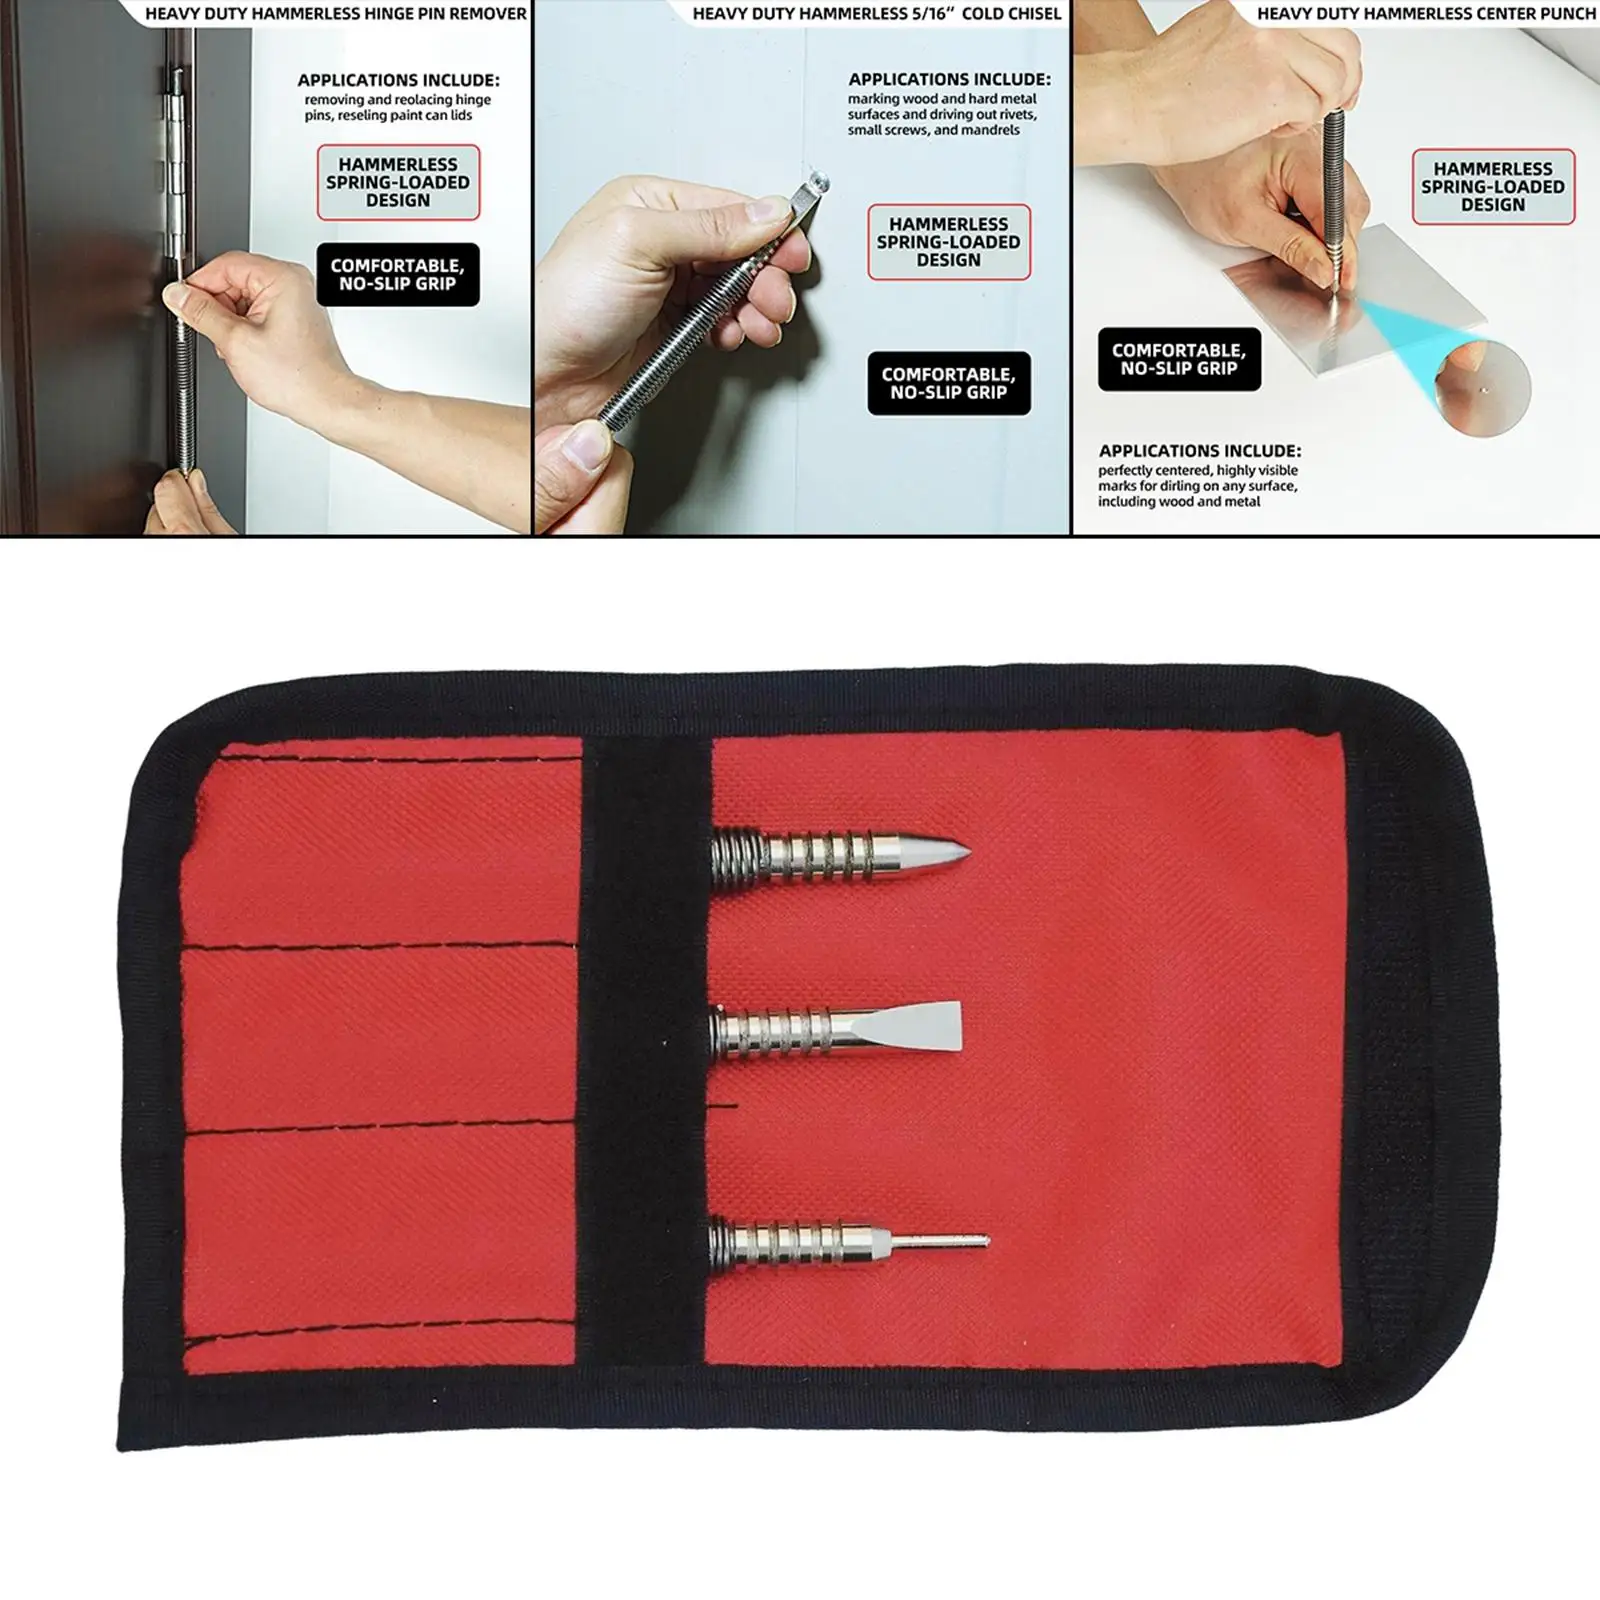 3x Hinge Pin Removerand Cold Chisel Center Punch Set with Storage Pouch Steel Hammerless Spring Punch Tool Set for Wood Working